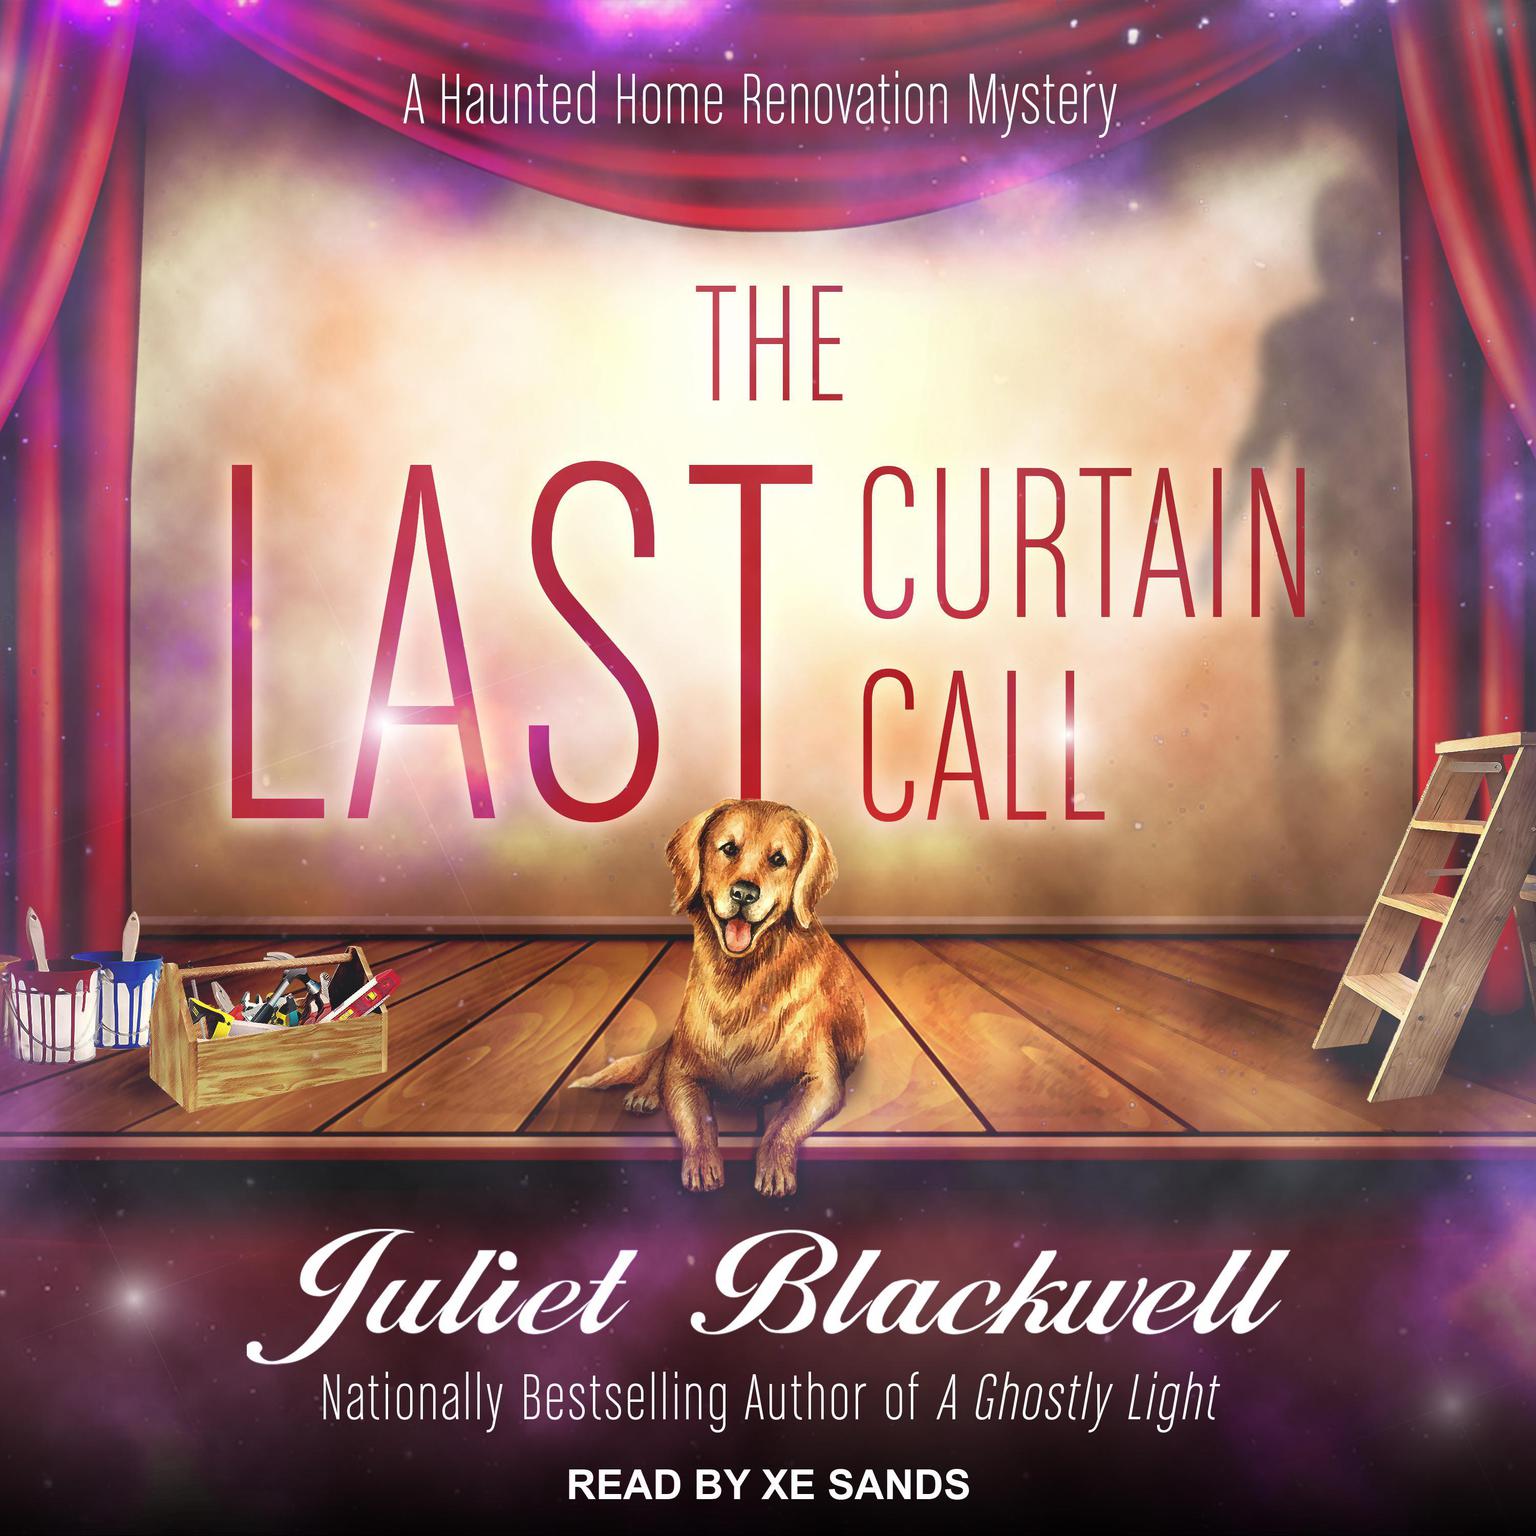 The Last Curtain Call Audiobook, by Juliet Blackwell